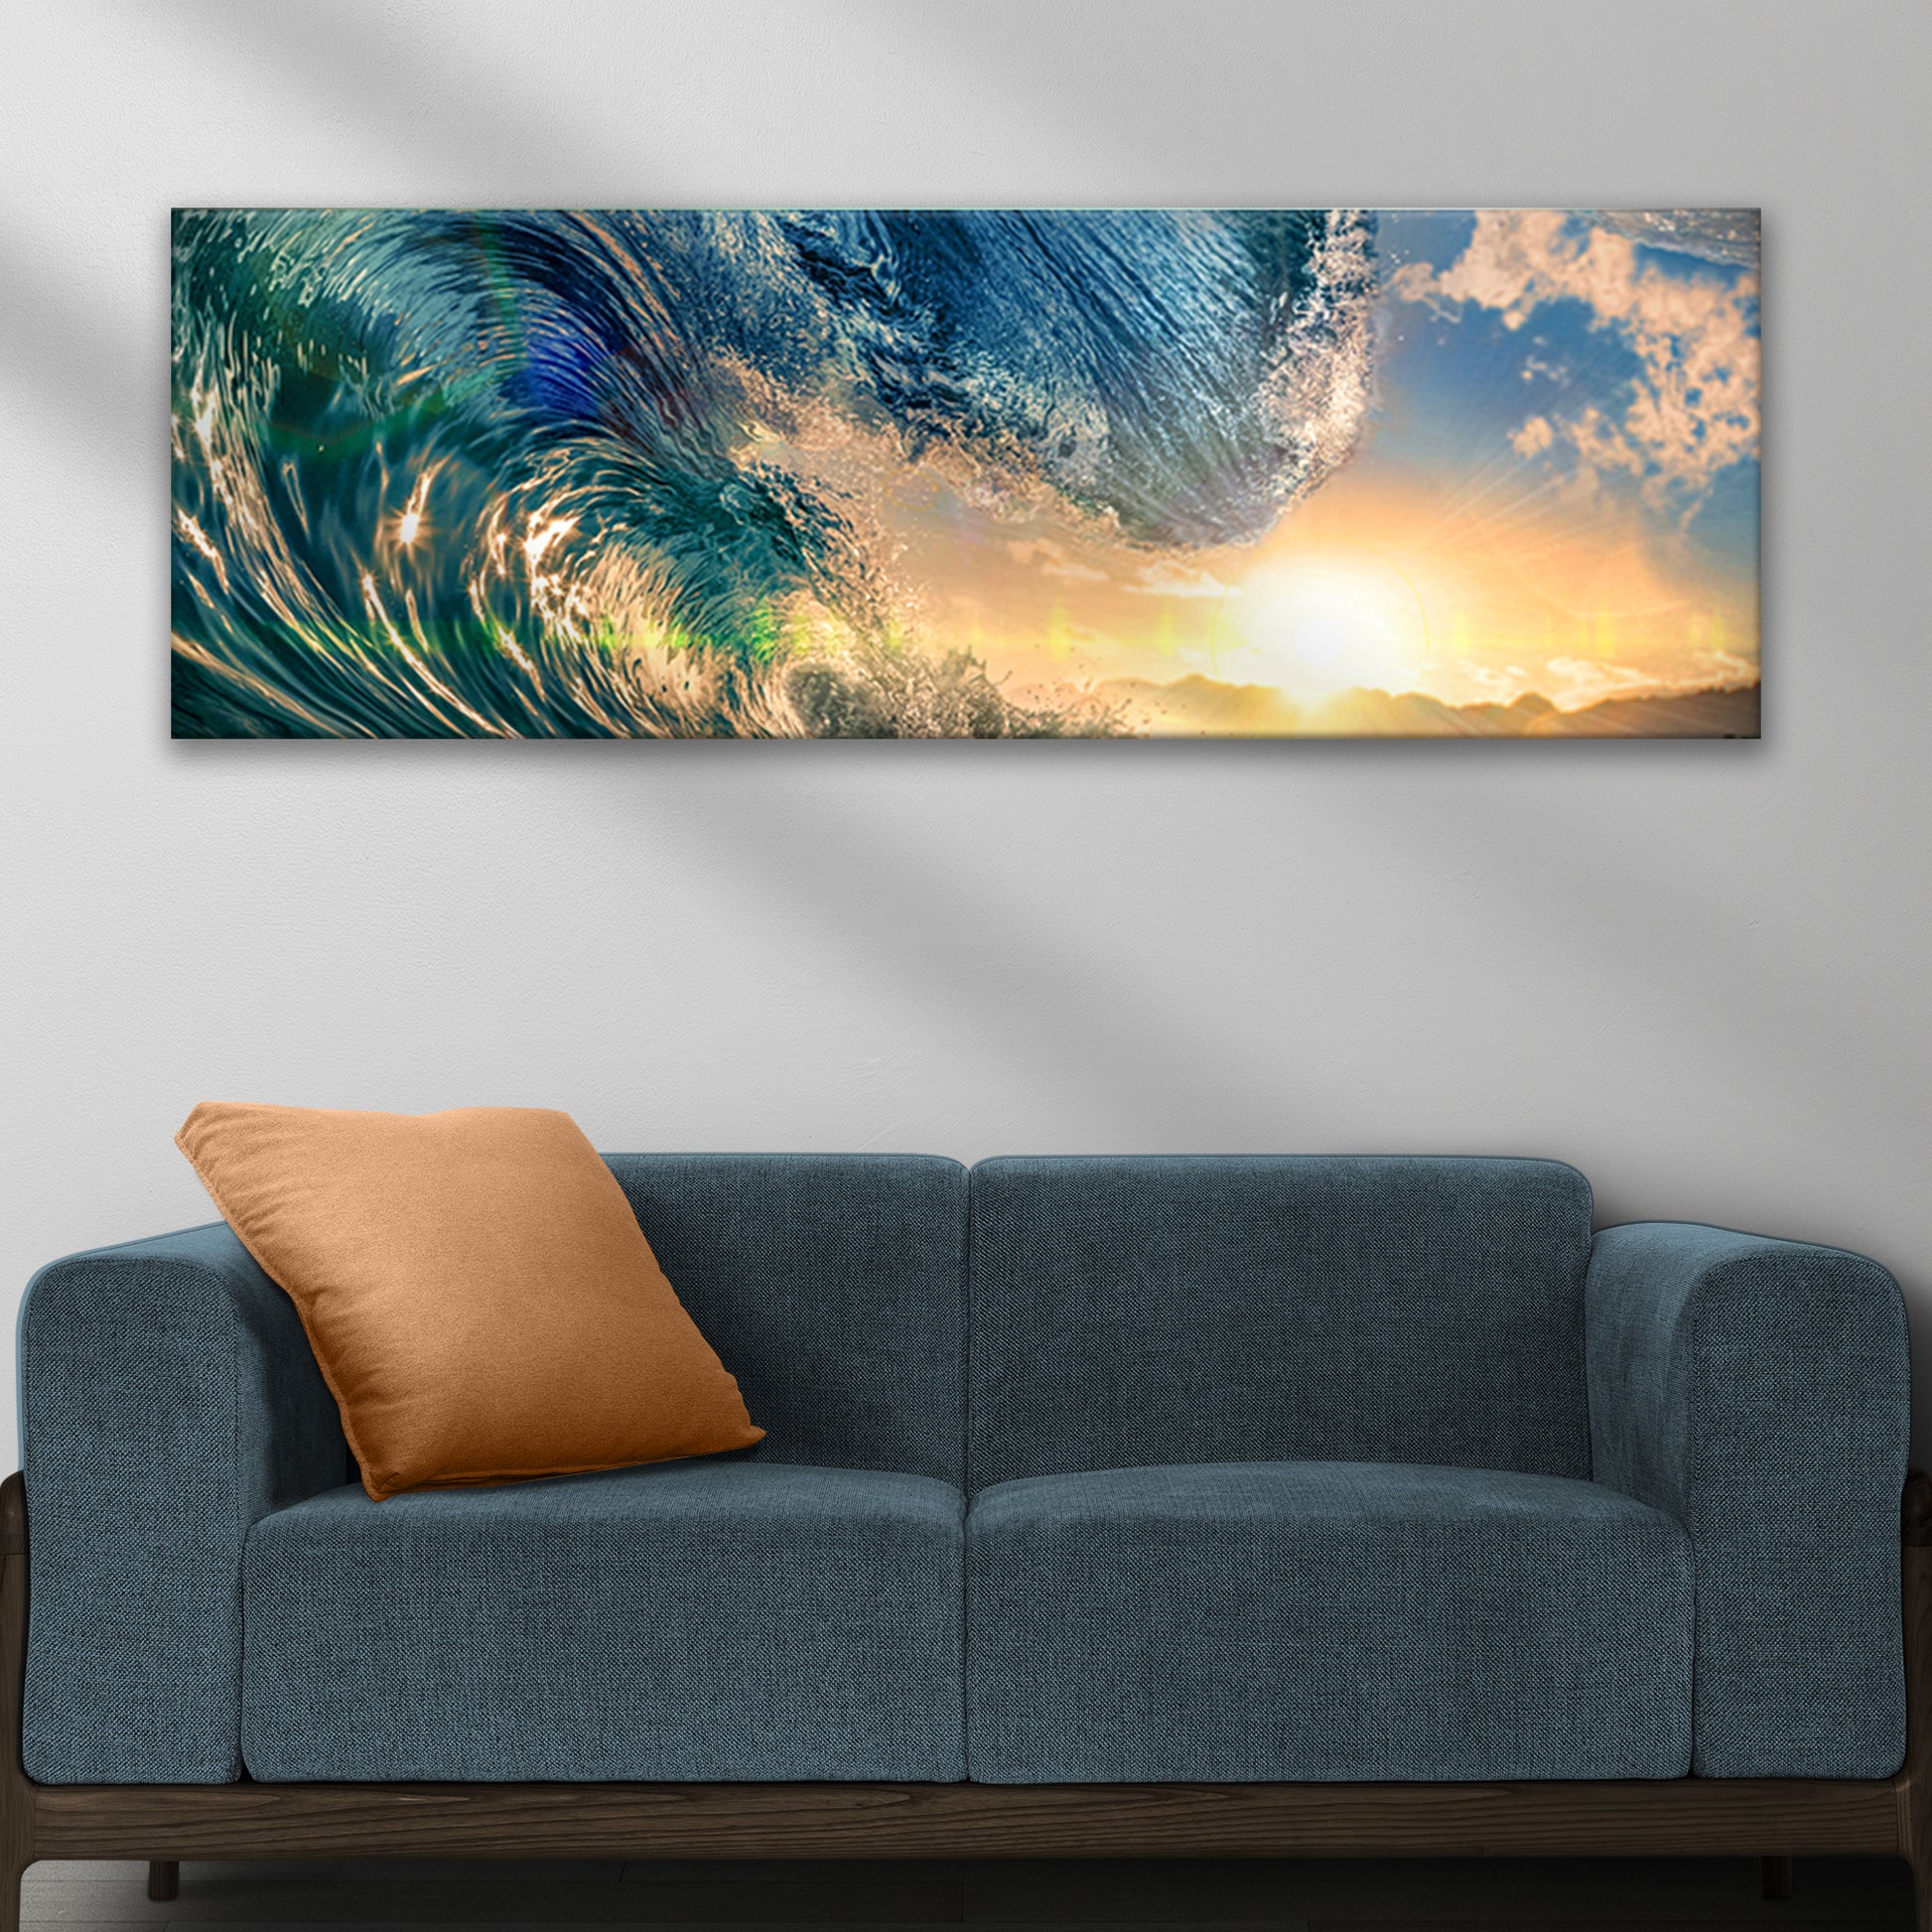 Ocean Waves Canvas Wall Art Style 2 - Image by Tailored Canvases